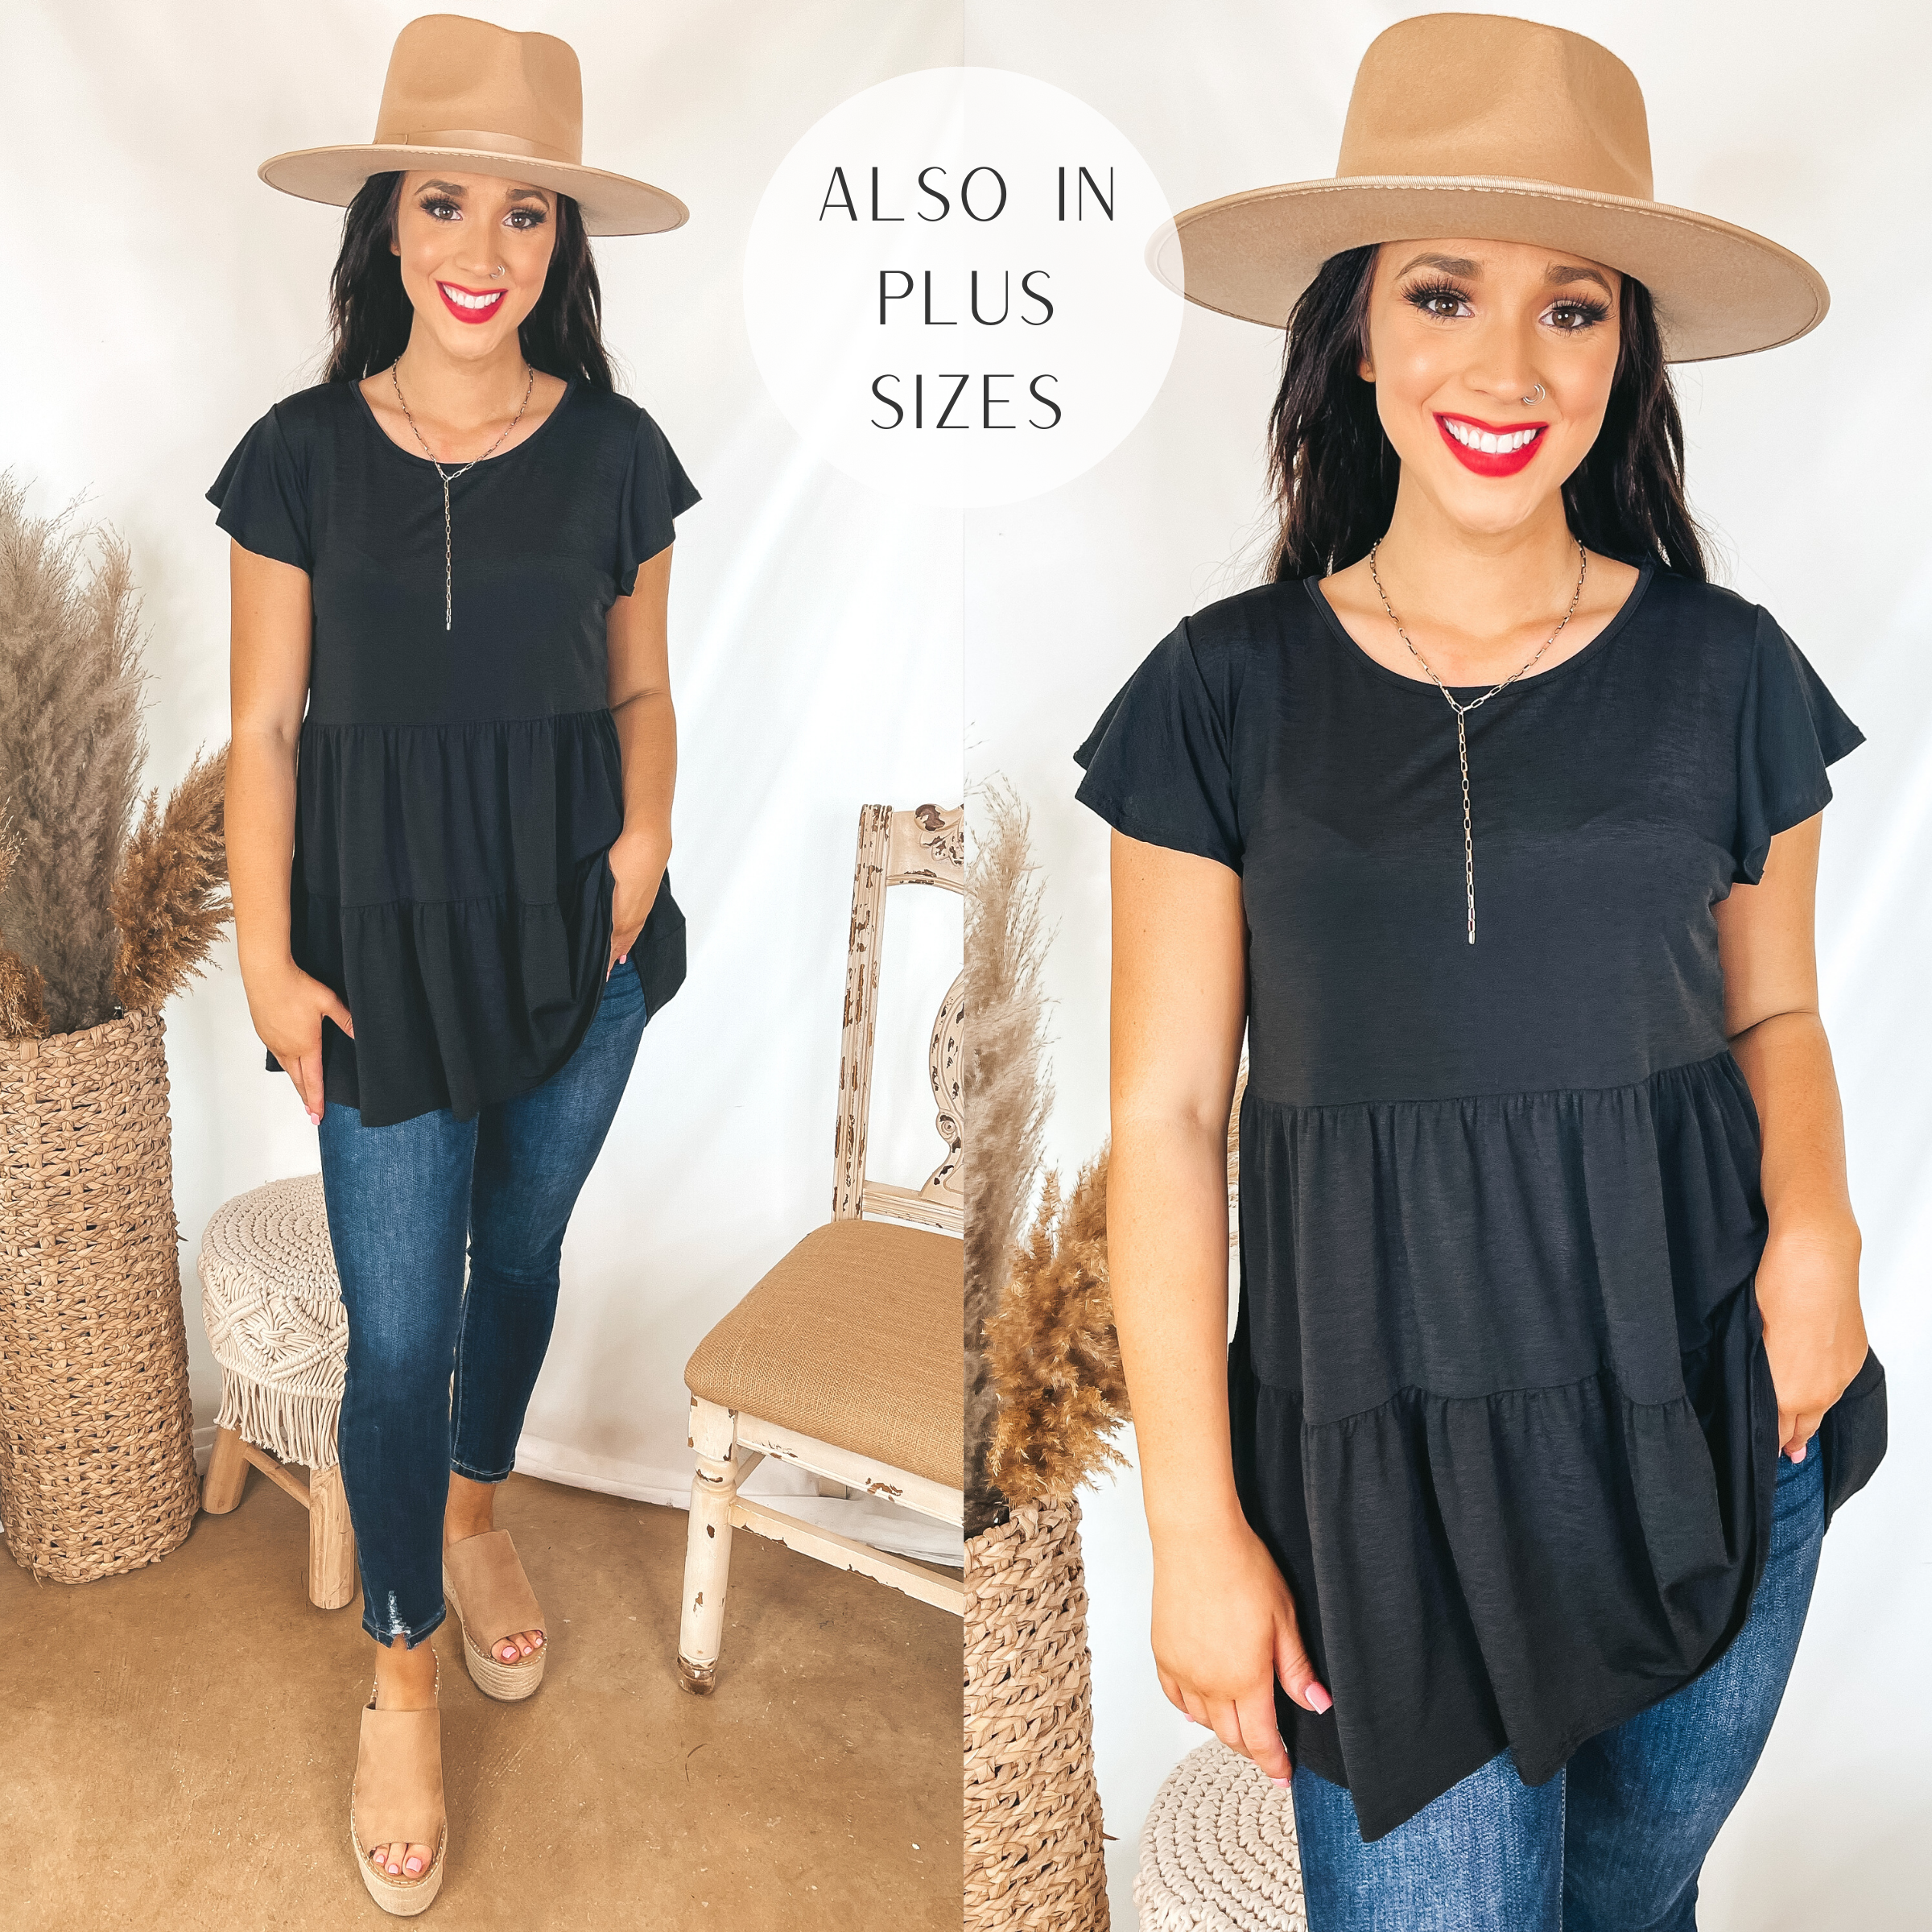 Model is wearing a black ruffle tiered top that has ruffle cap sleeves. Model has it paired with dark wash skinnies, tan wedges, and a tan hat.